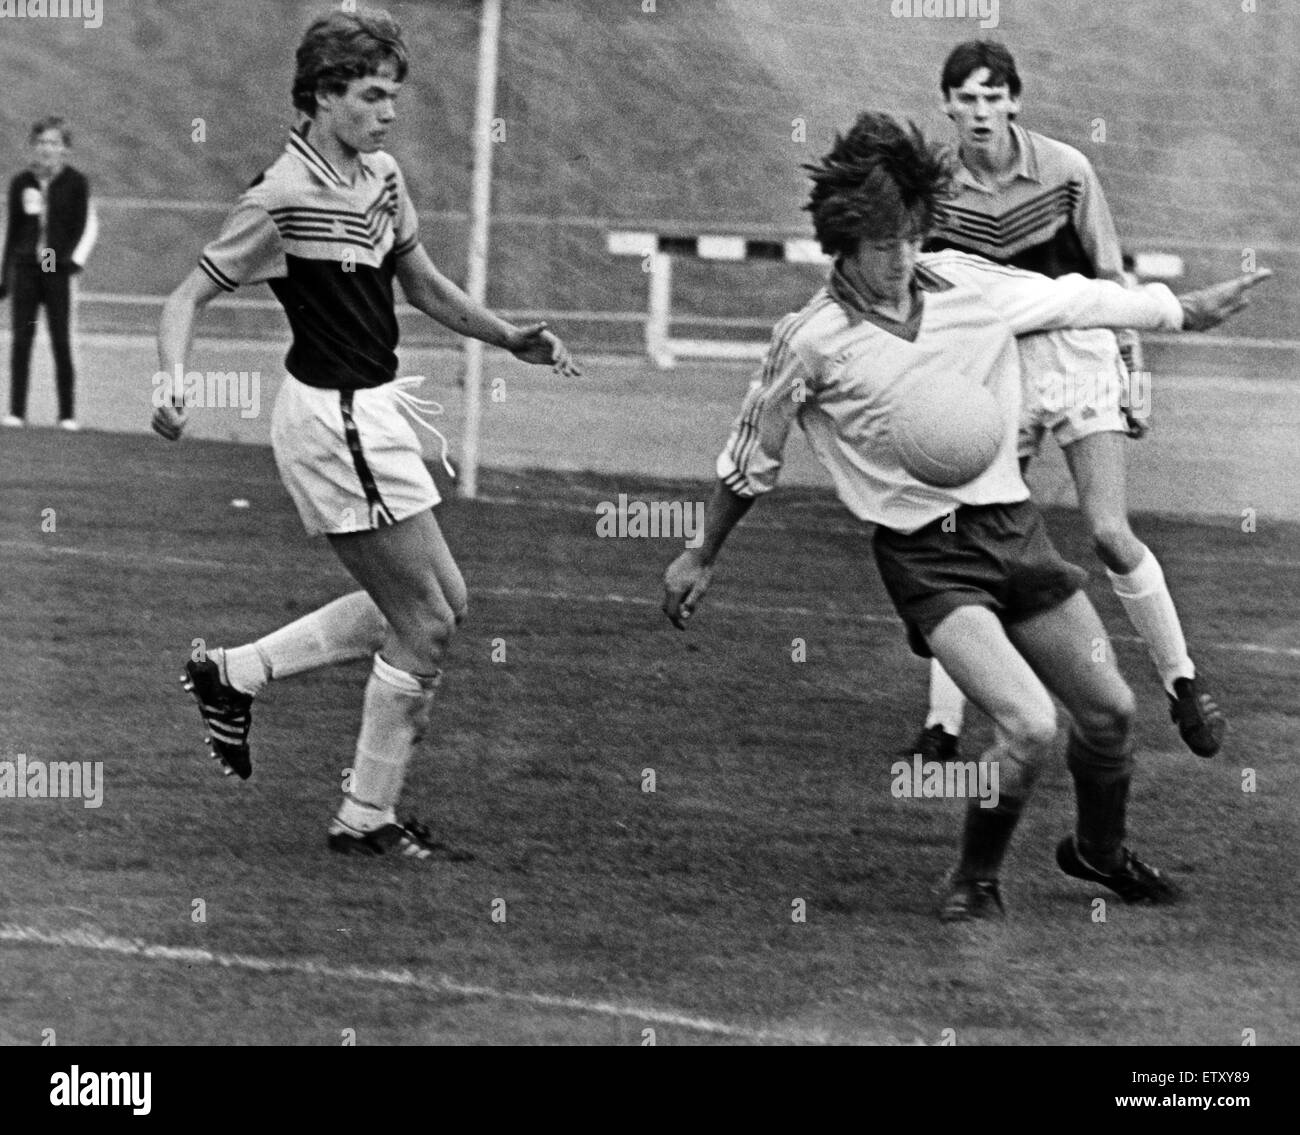 Middlesbrough RAOB 1-5 Star United of Northern Ireland, international youth tournament at Clairville, 25th August 1979. Star United player (white shirt) on the  attack. Youth Football Middlesbrough Feature. Stock Photo